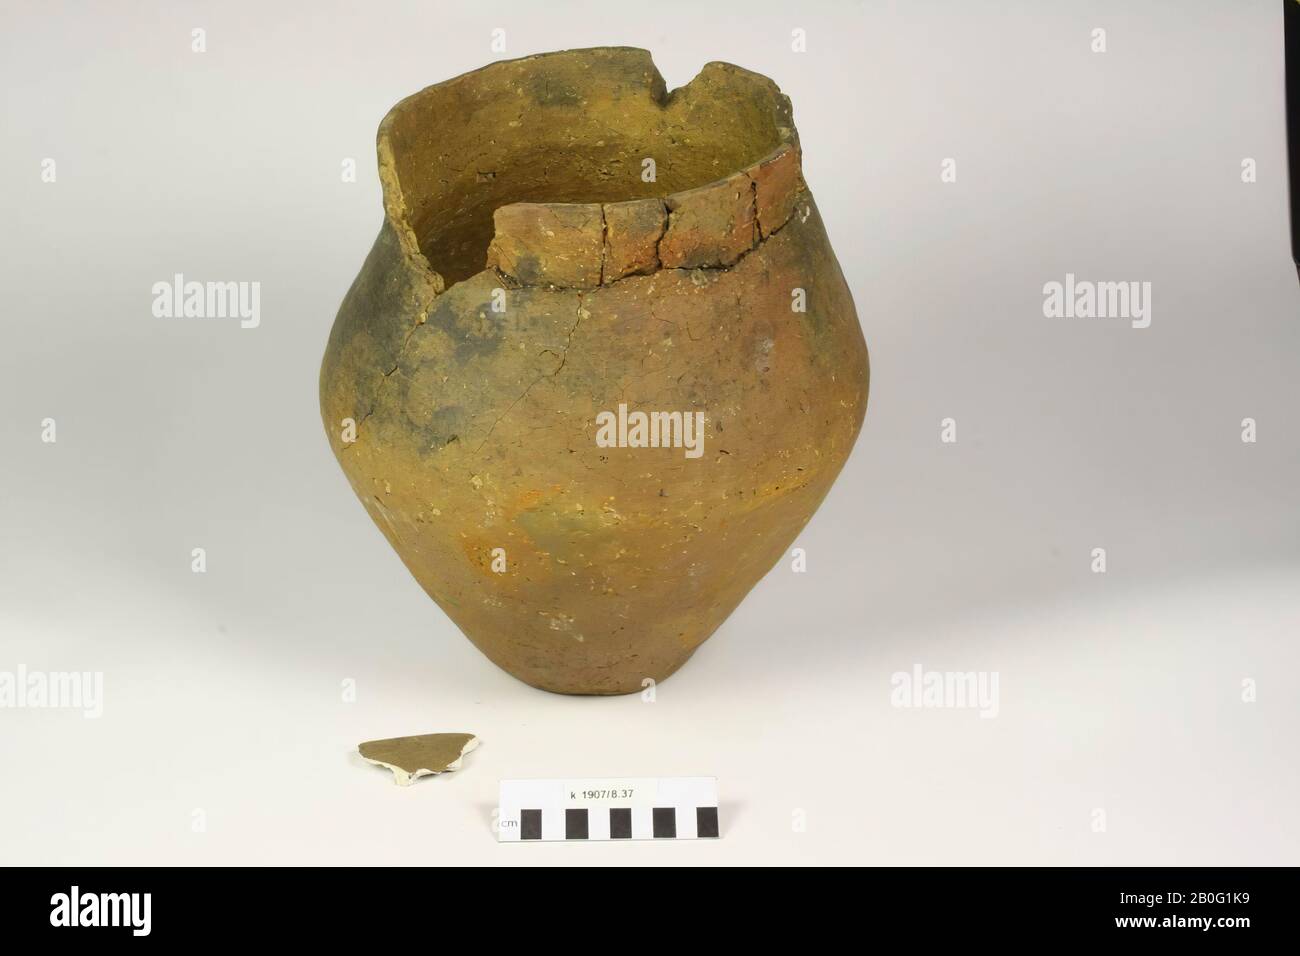 Gallo-Germanic urn of reddish-brown earthenware, inward running shoulder and high upright edge. Unstable old bonding and addition (separately included), parts of the rim are missing, 1 loose shard. On 12-11-2007 old mold removed., Urn, earthenware, h: 29.3 cm, prehistory -1200 Stock Photo